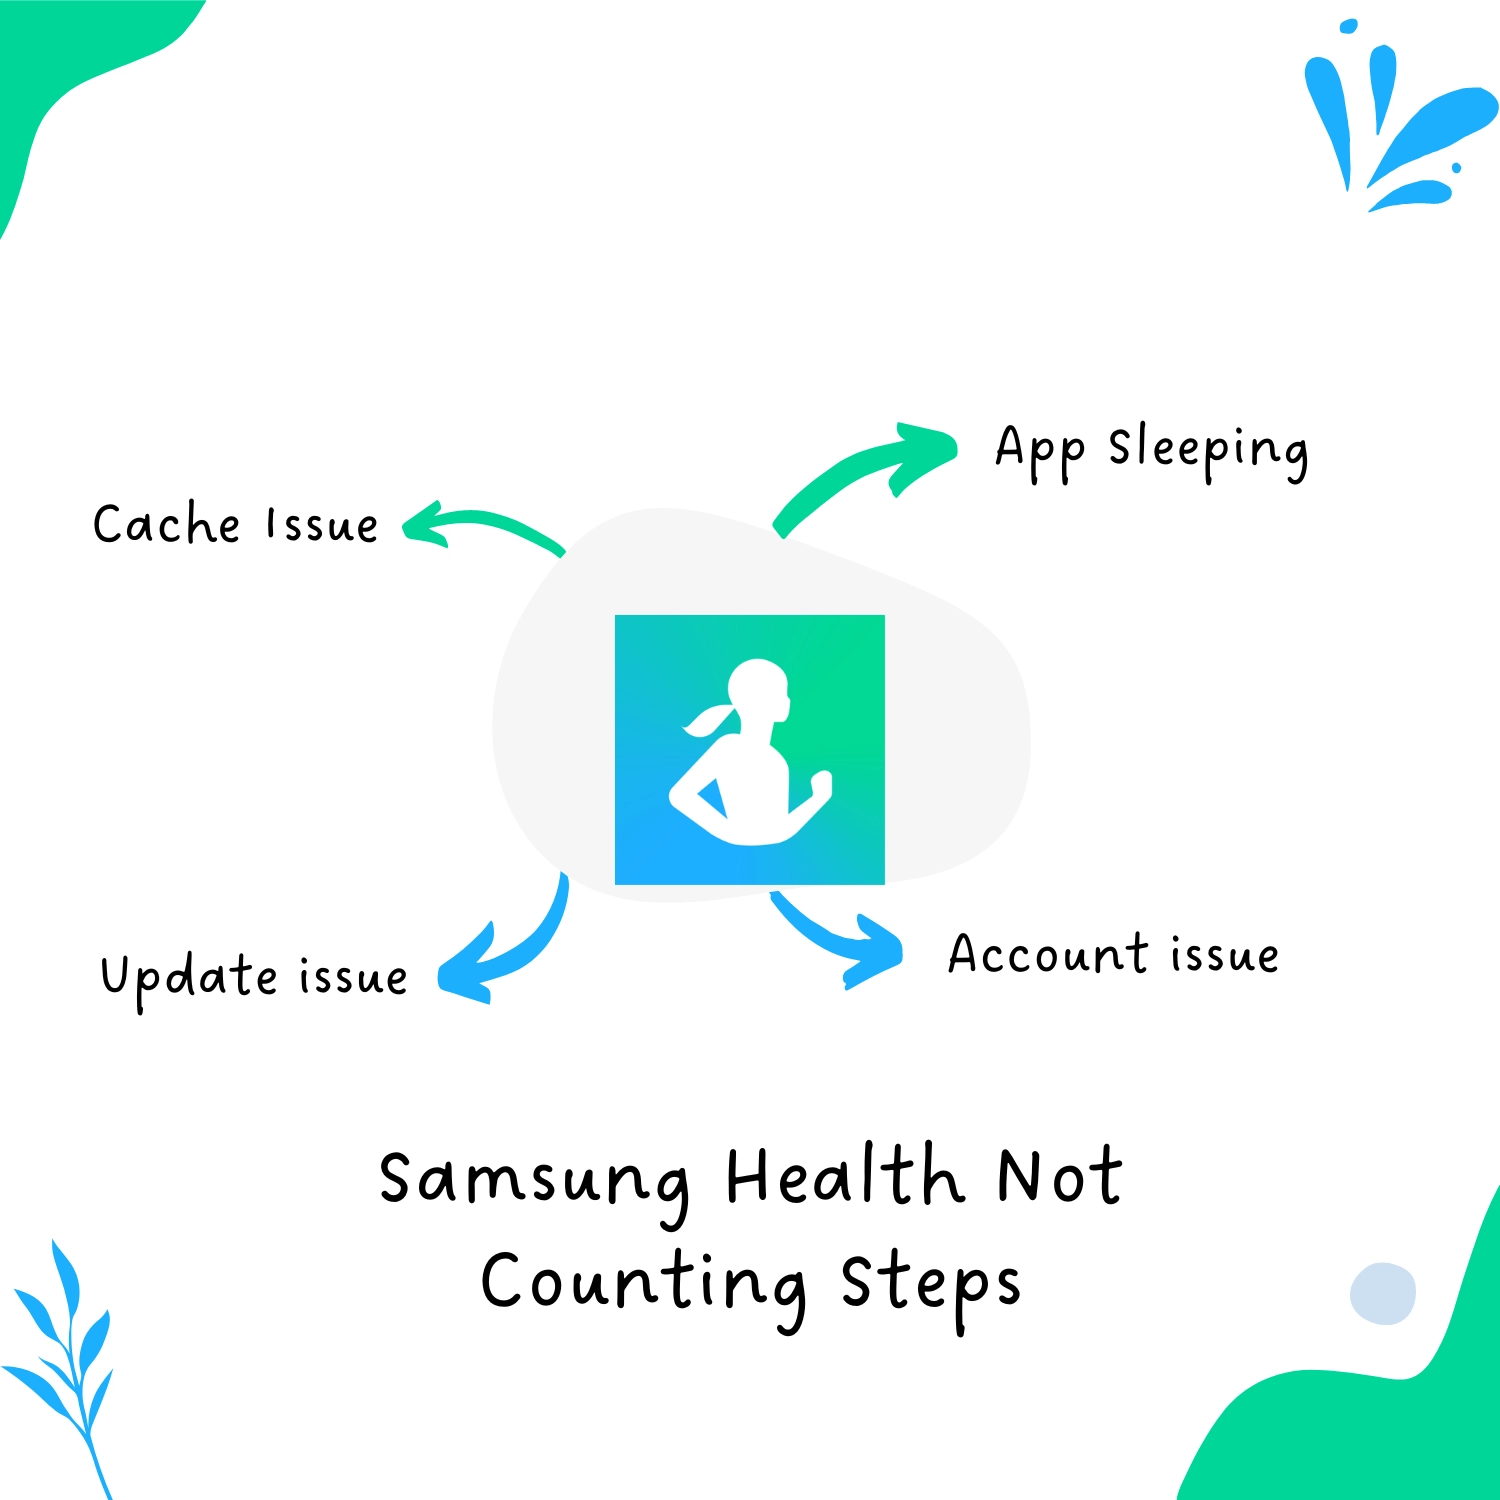 Samsung Health Not Counting Steps